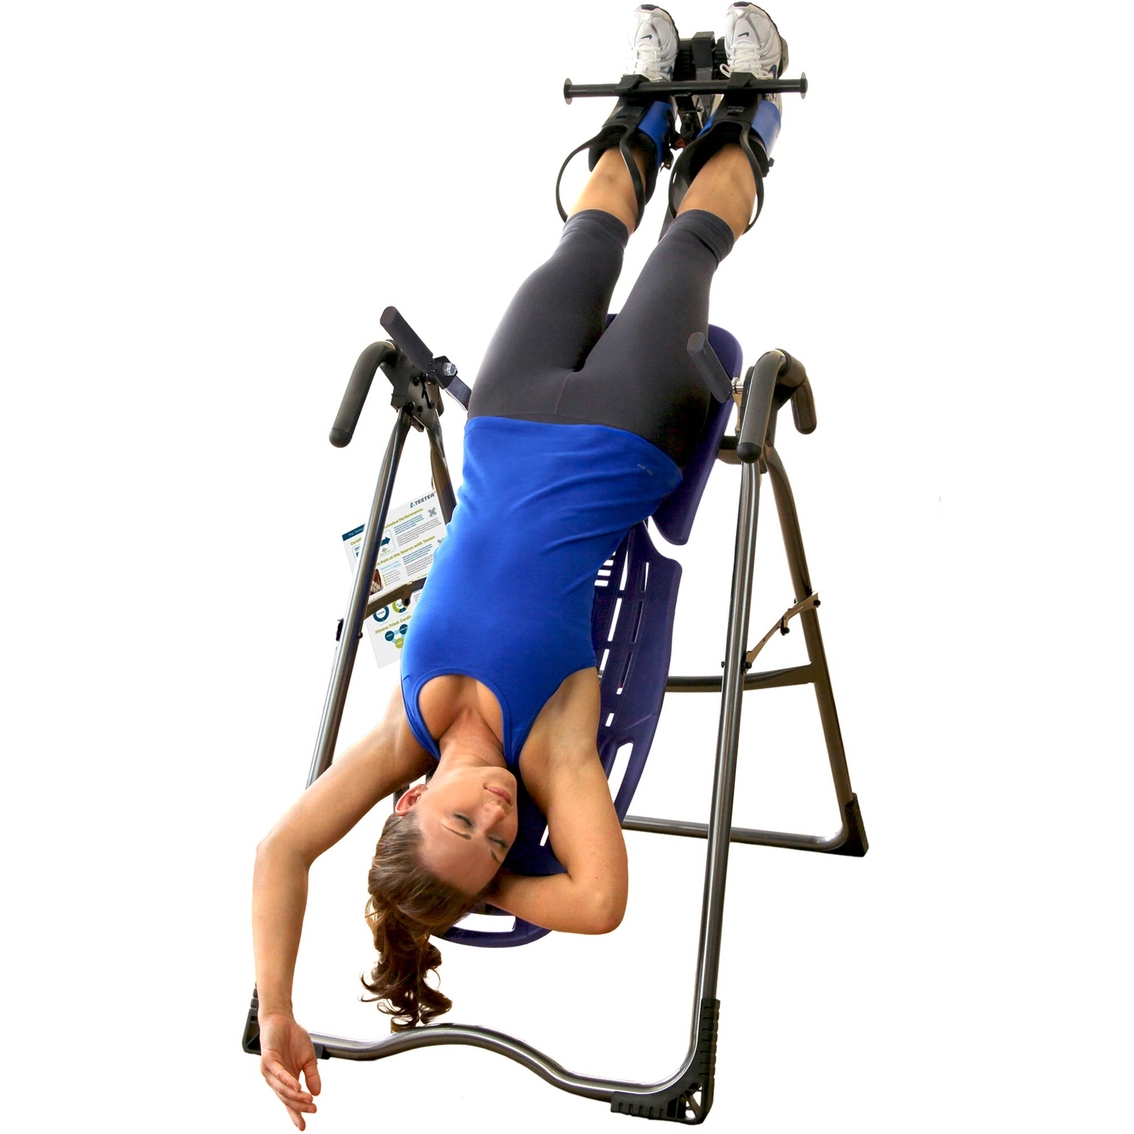 Teeter EP-560 Sport Ed. Inversion Table with Gravity Boots and Back Pain Relief DVD - Image 2 of 3